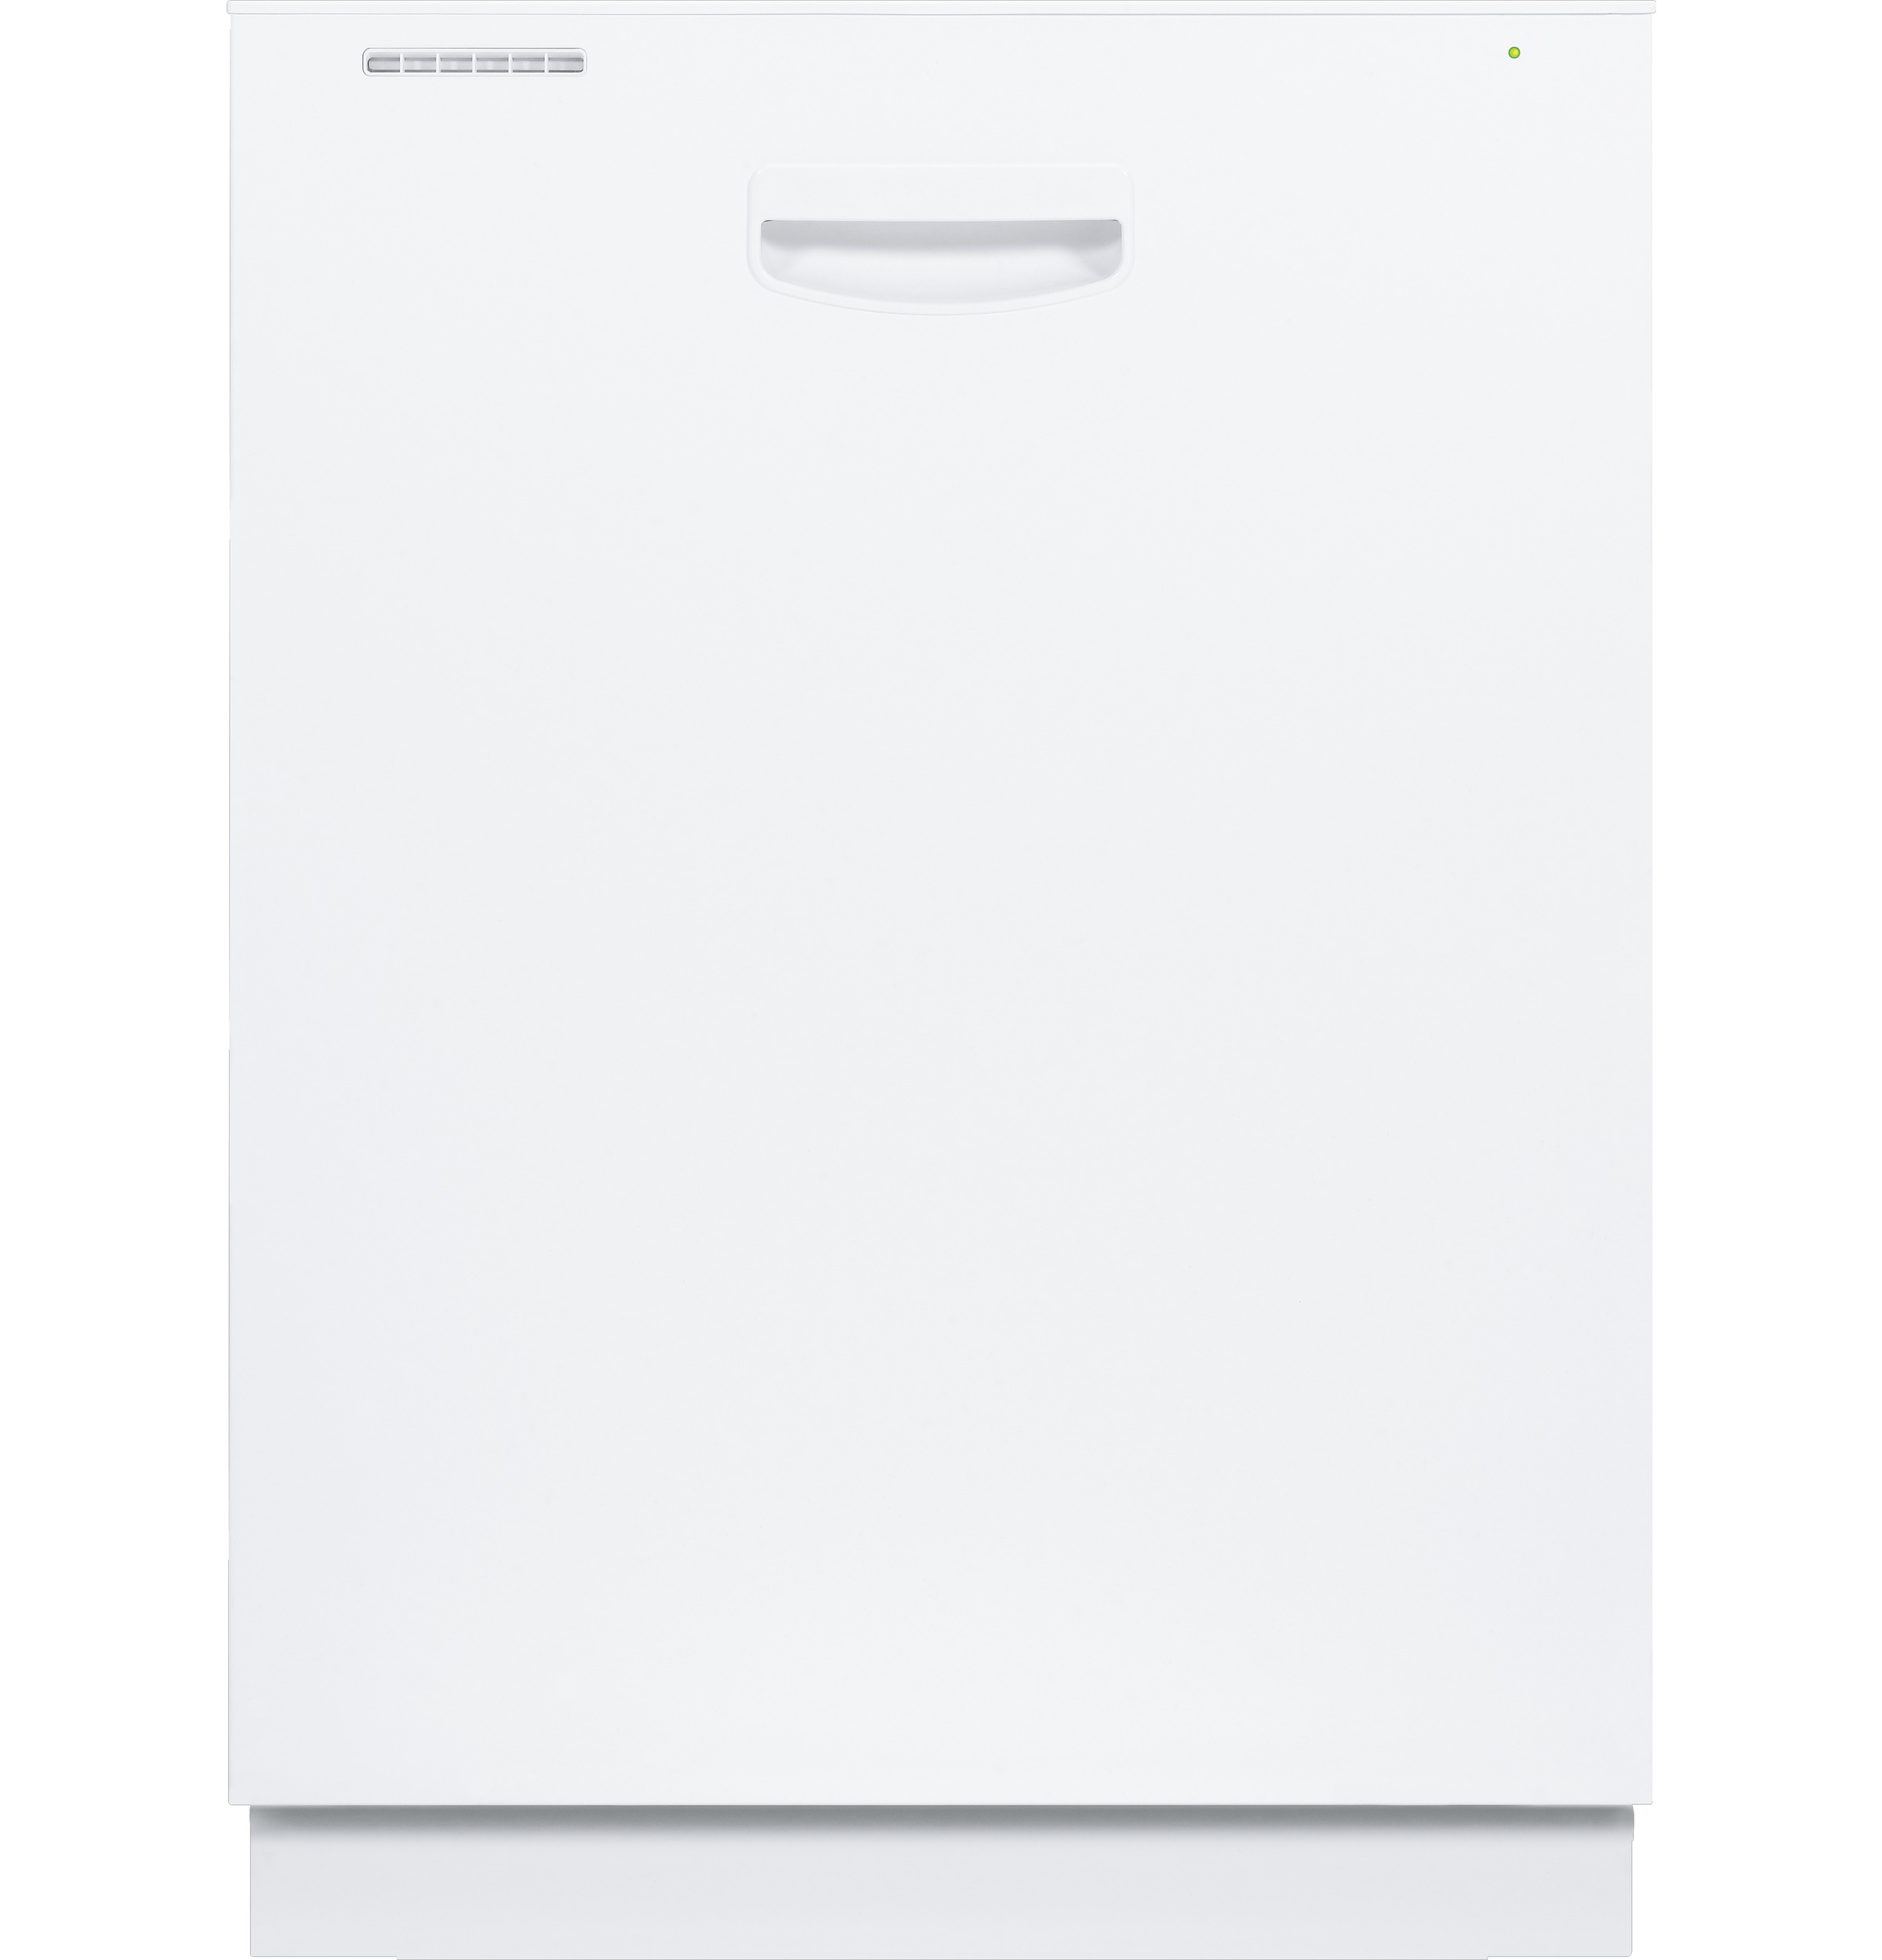 GE® Stainless Interior Dishwasher with Hidden Controls and Recessed Handle